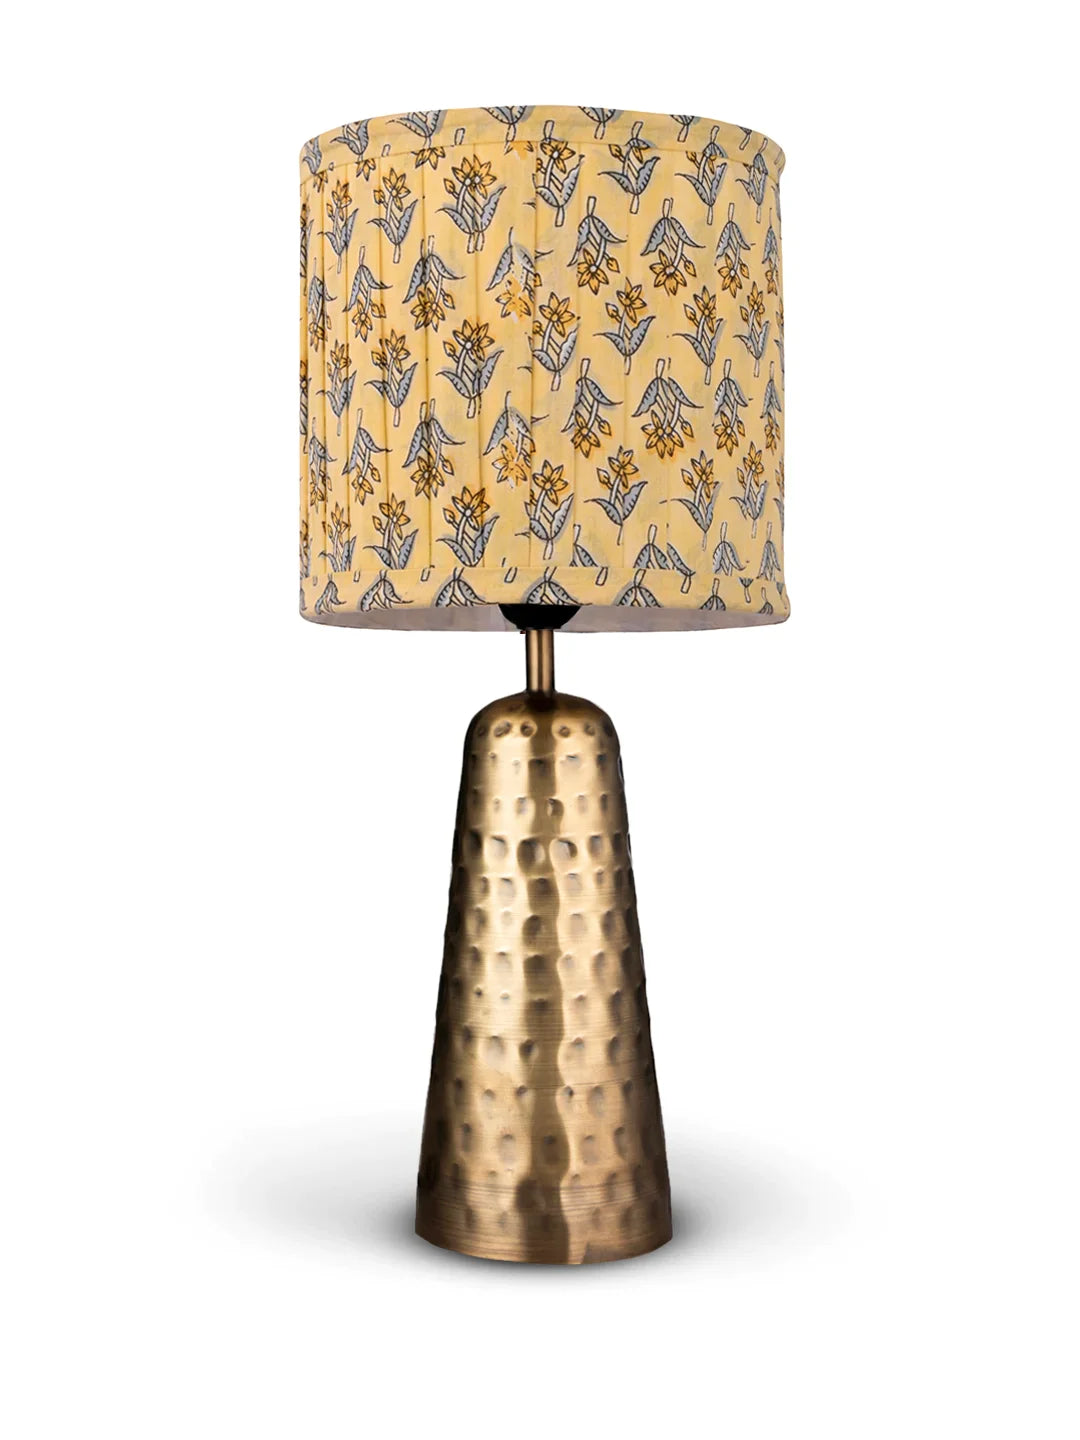 Golden Hammered V-Shaped Lamp with Pleeted Muticolor Lemon Shade